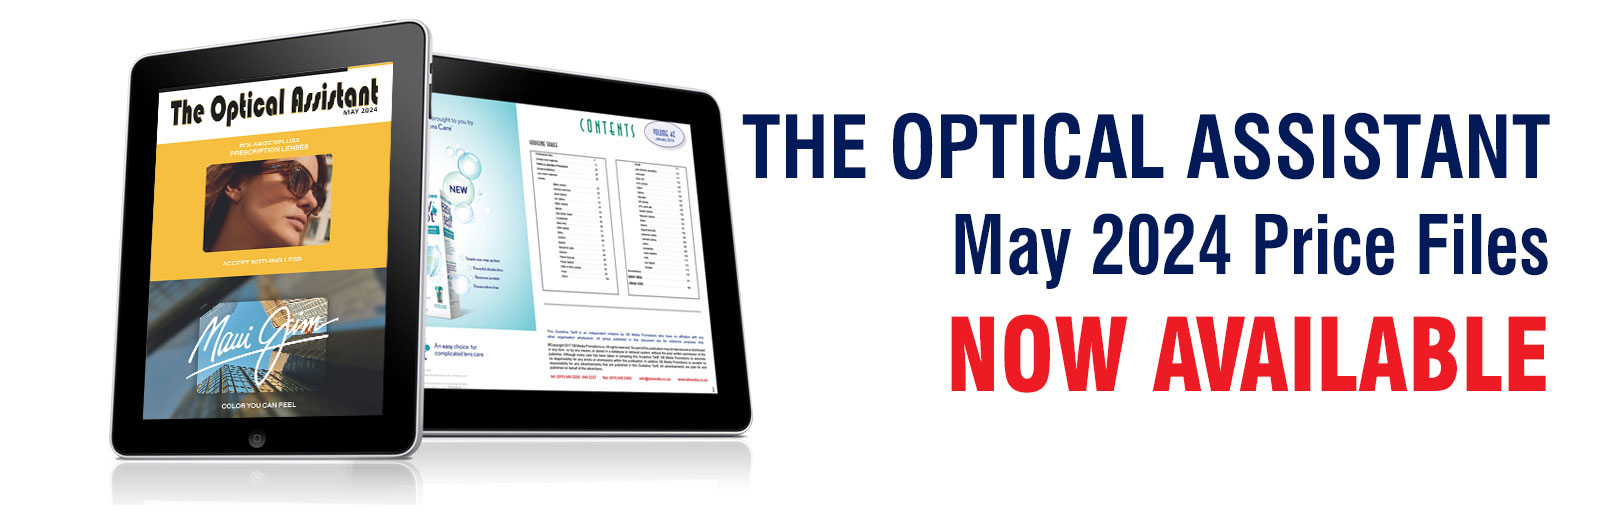 The Optical Assistant, May 2024 Price Files